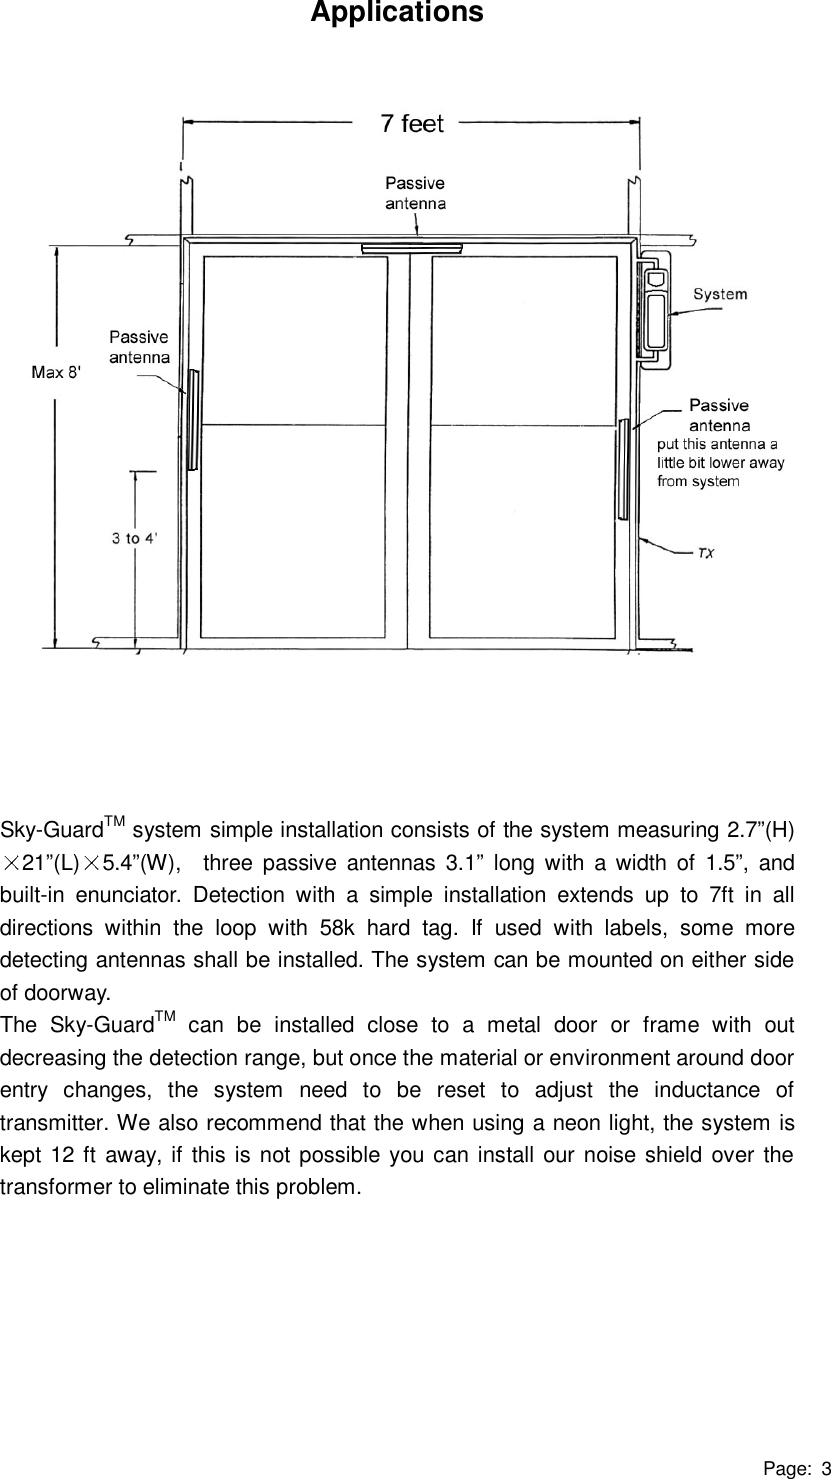 Page: 3 Applications                       Sky-GuardTM system simple installation consists of the system measuring 2.7”(H)21”(L) 5.4”(W),  three passive antennas 3.1” long with a width of 1.5”, and built-in enunciator. Detection with a simple installation extends up to 7ft in all directions within the loop with 58k hard tag. If used with labels, some more detecting antennas shall be installed. The system can be mounted on either side of doorway.   The Sky-GuardTM can be installed close to a metal door or frame with out decreasing the detection range, but once the material or environment around door entry changes, the system need to be reset to adjust the inductance of transmitter. We also recommend that the when using a neon light, the system is kept 12 ft away, if this is not possible you can install our noise shield over the transformer to eliminate this problem. 